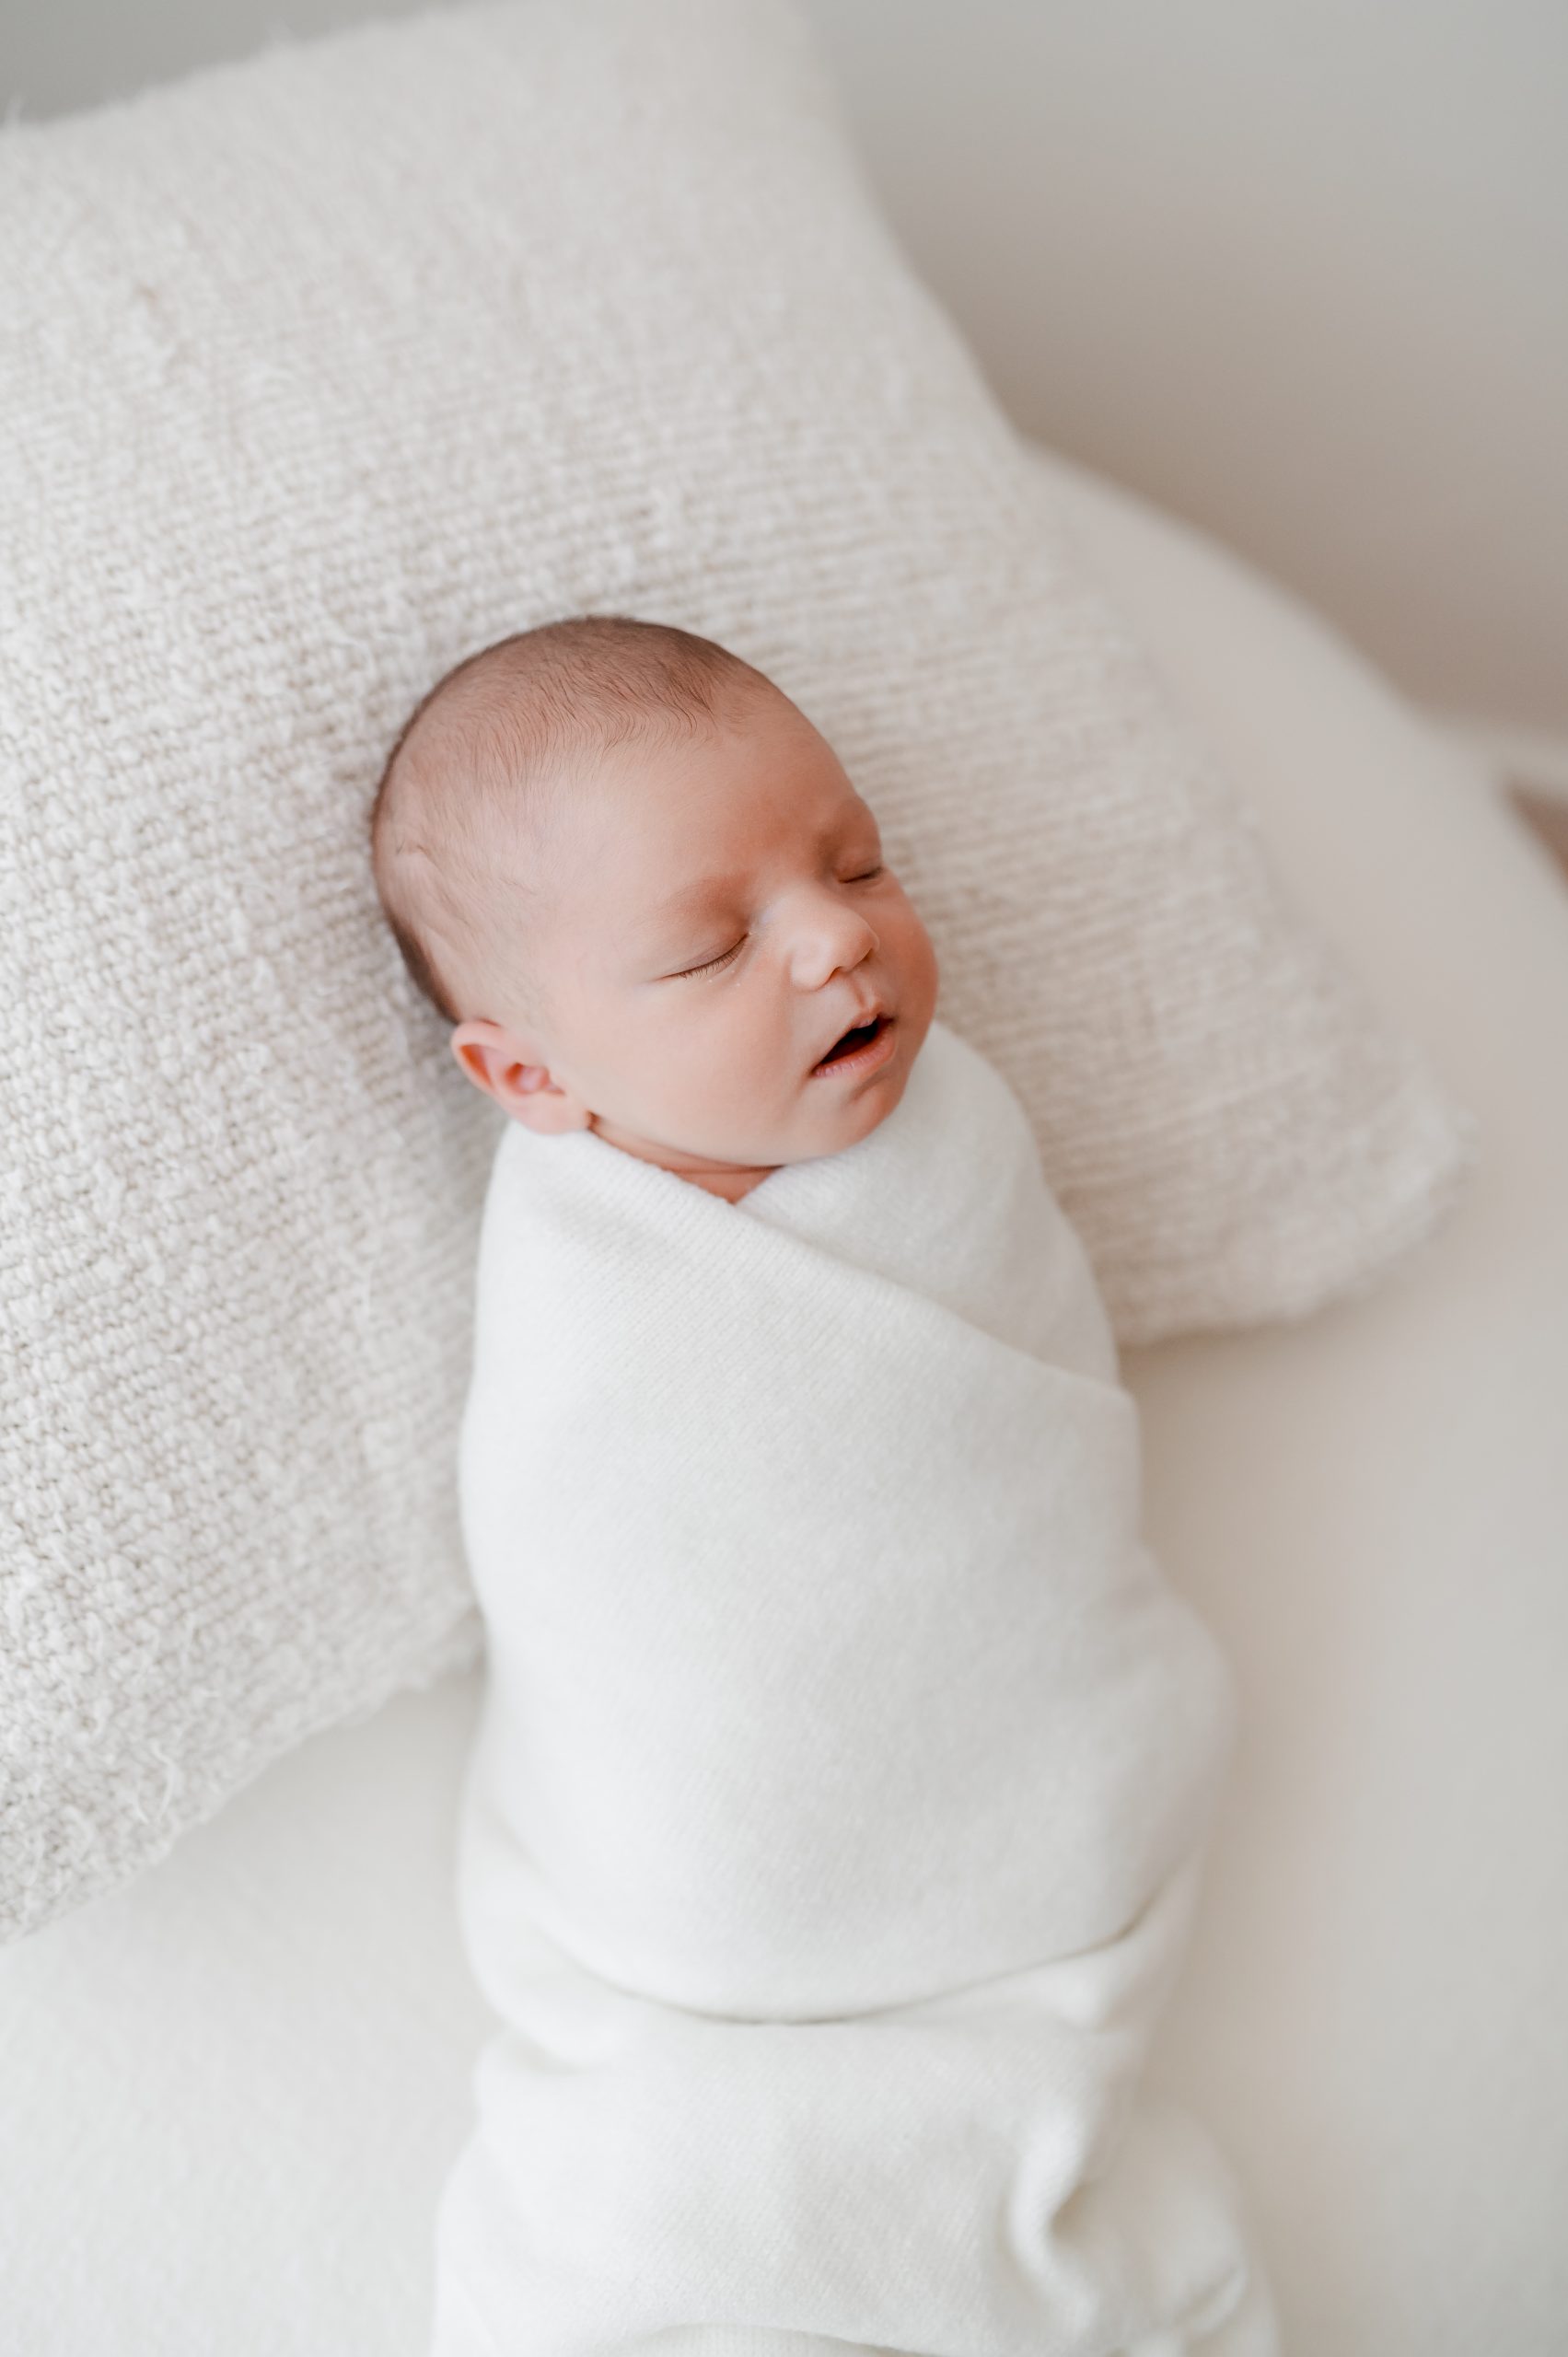 tiny newborn baby is wrapped up in a white swaddle and laid on a soft white pillow, she sleeps soundly with her mouth just slightly open. Beautiful creamy light floats down onto her cheek.